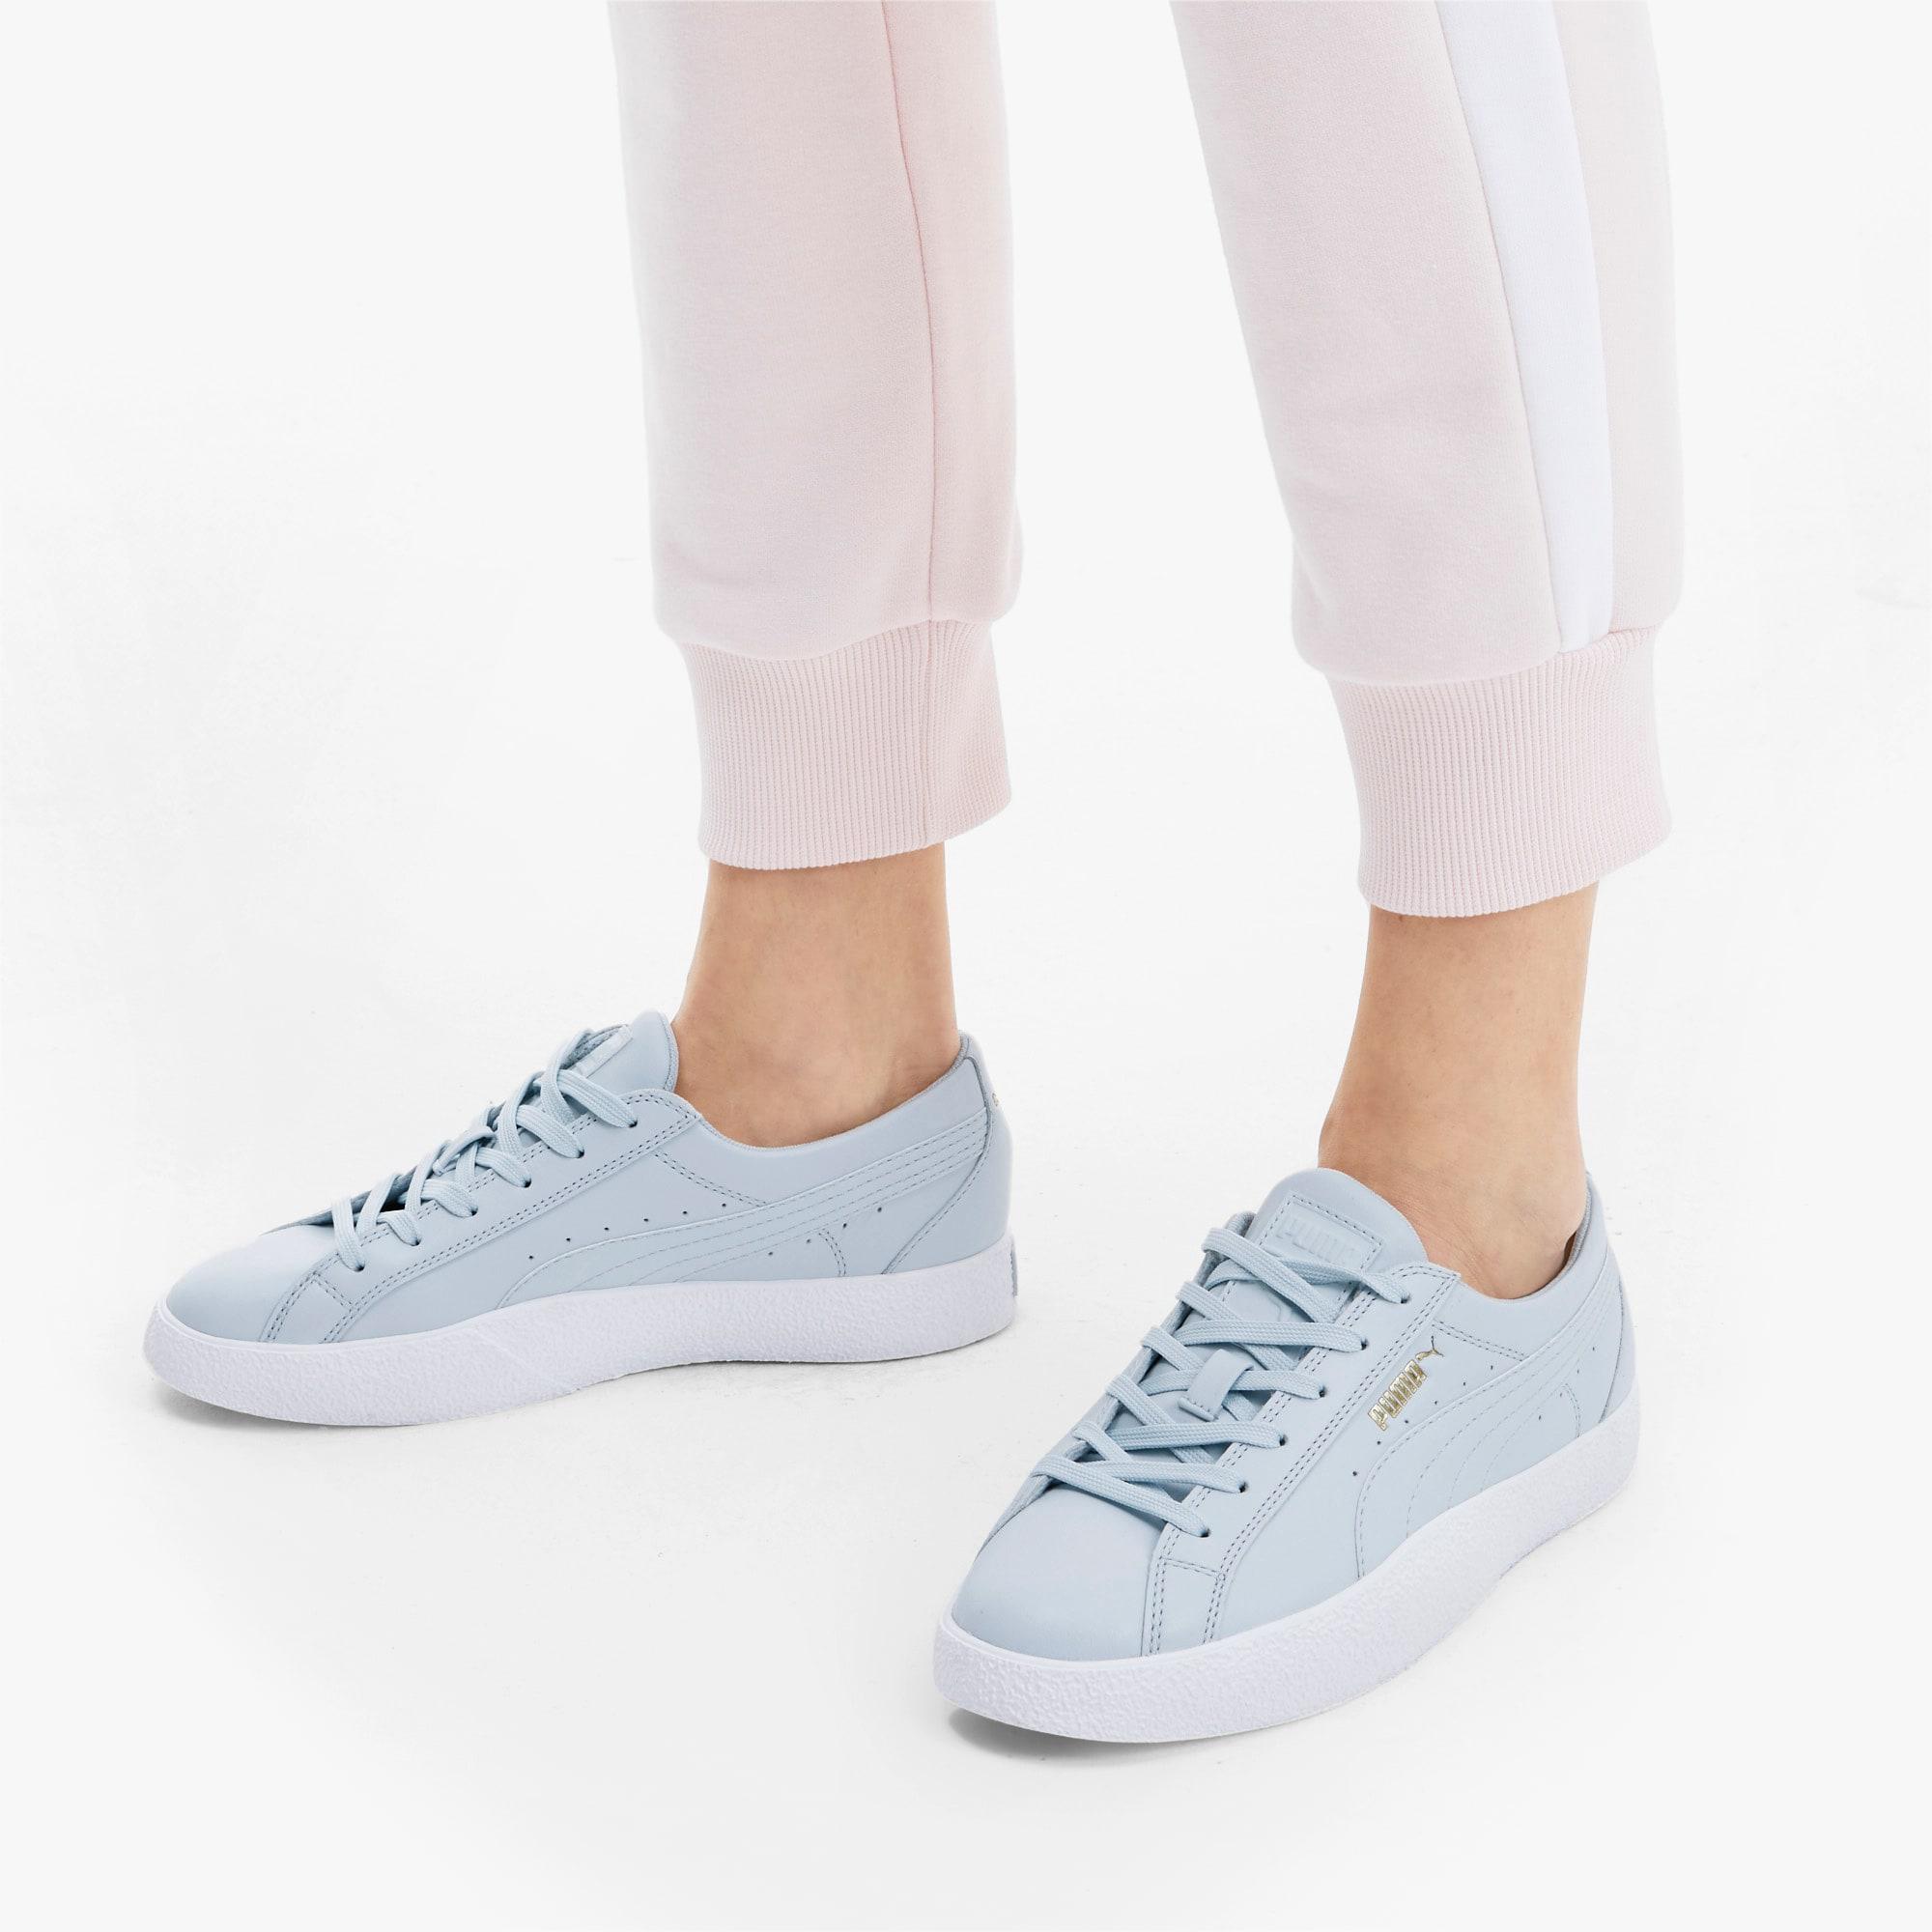 PUMA Leather Love Sneakers in White - Lyst